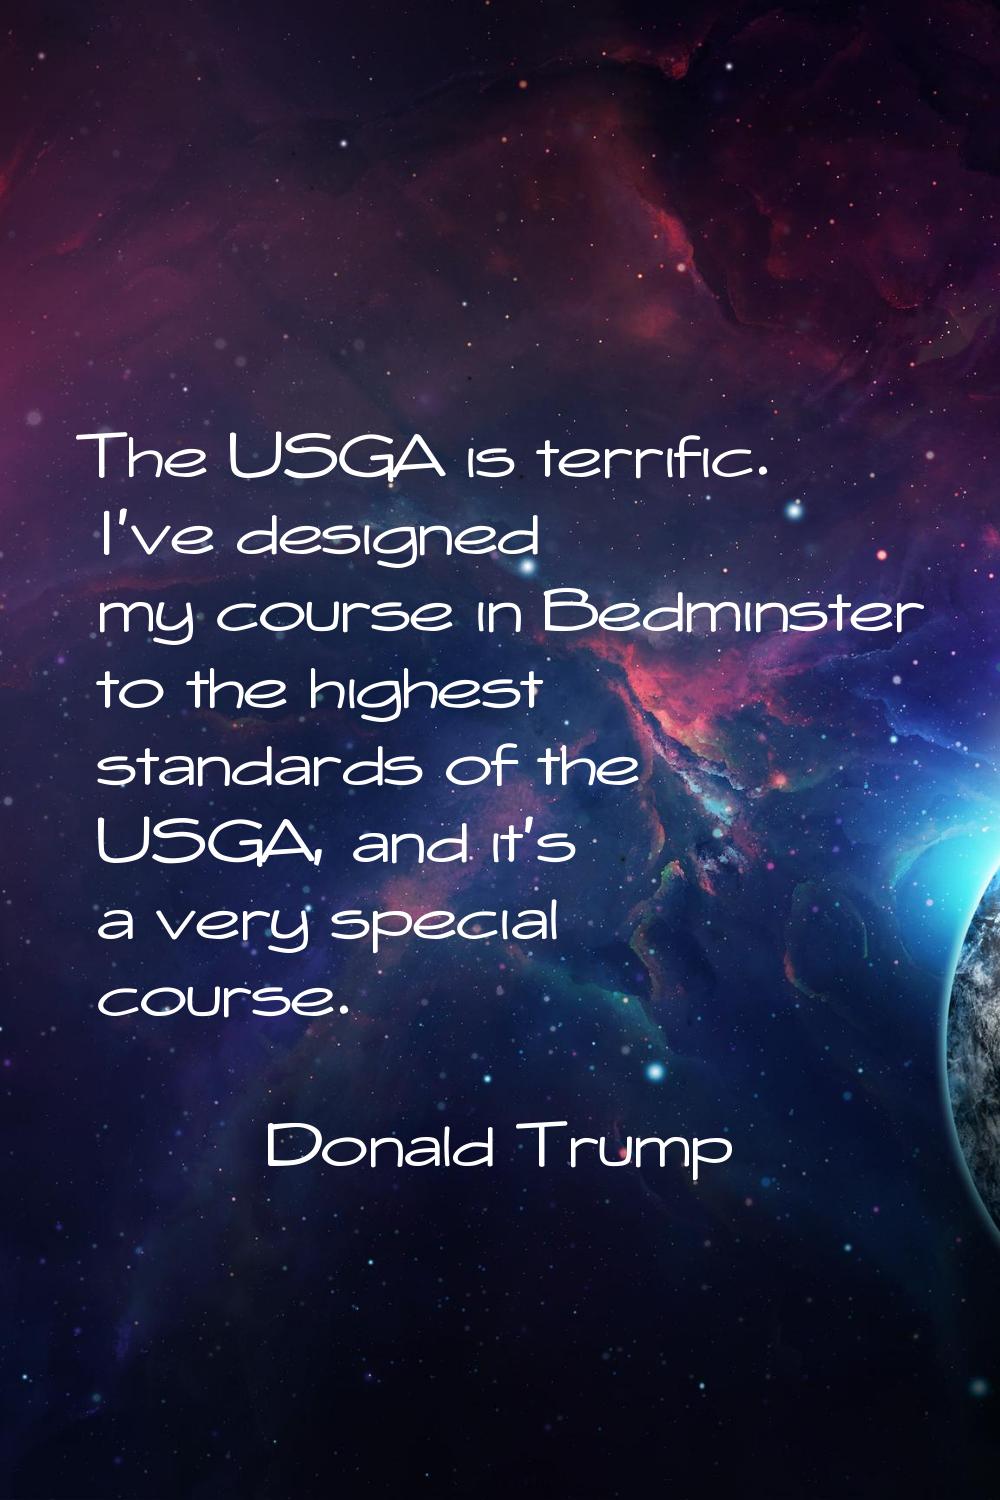 The USGA is terrific. I've designed my course in Bedminster to the highest standards of the USGA, a